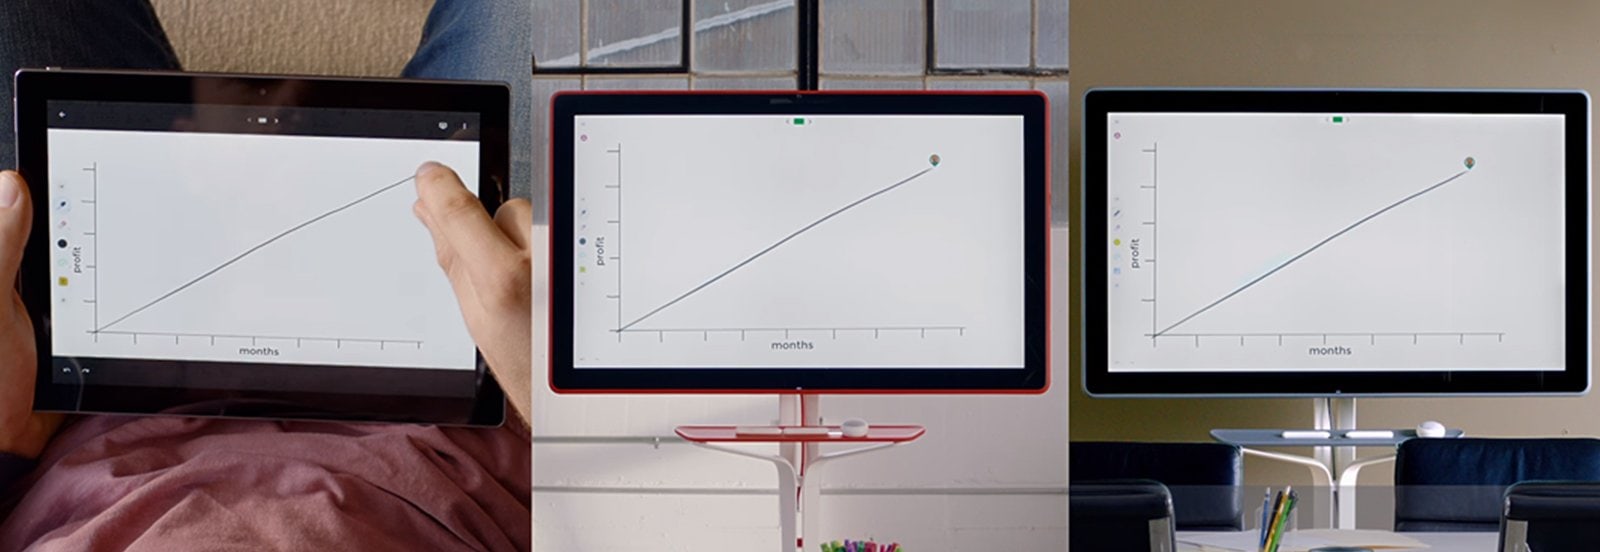 Image of collaborative work with Google Jamboard